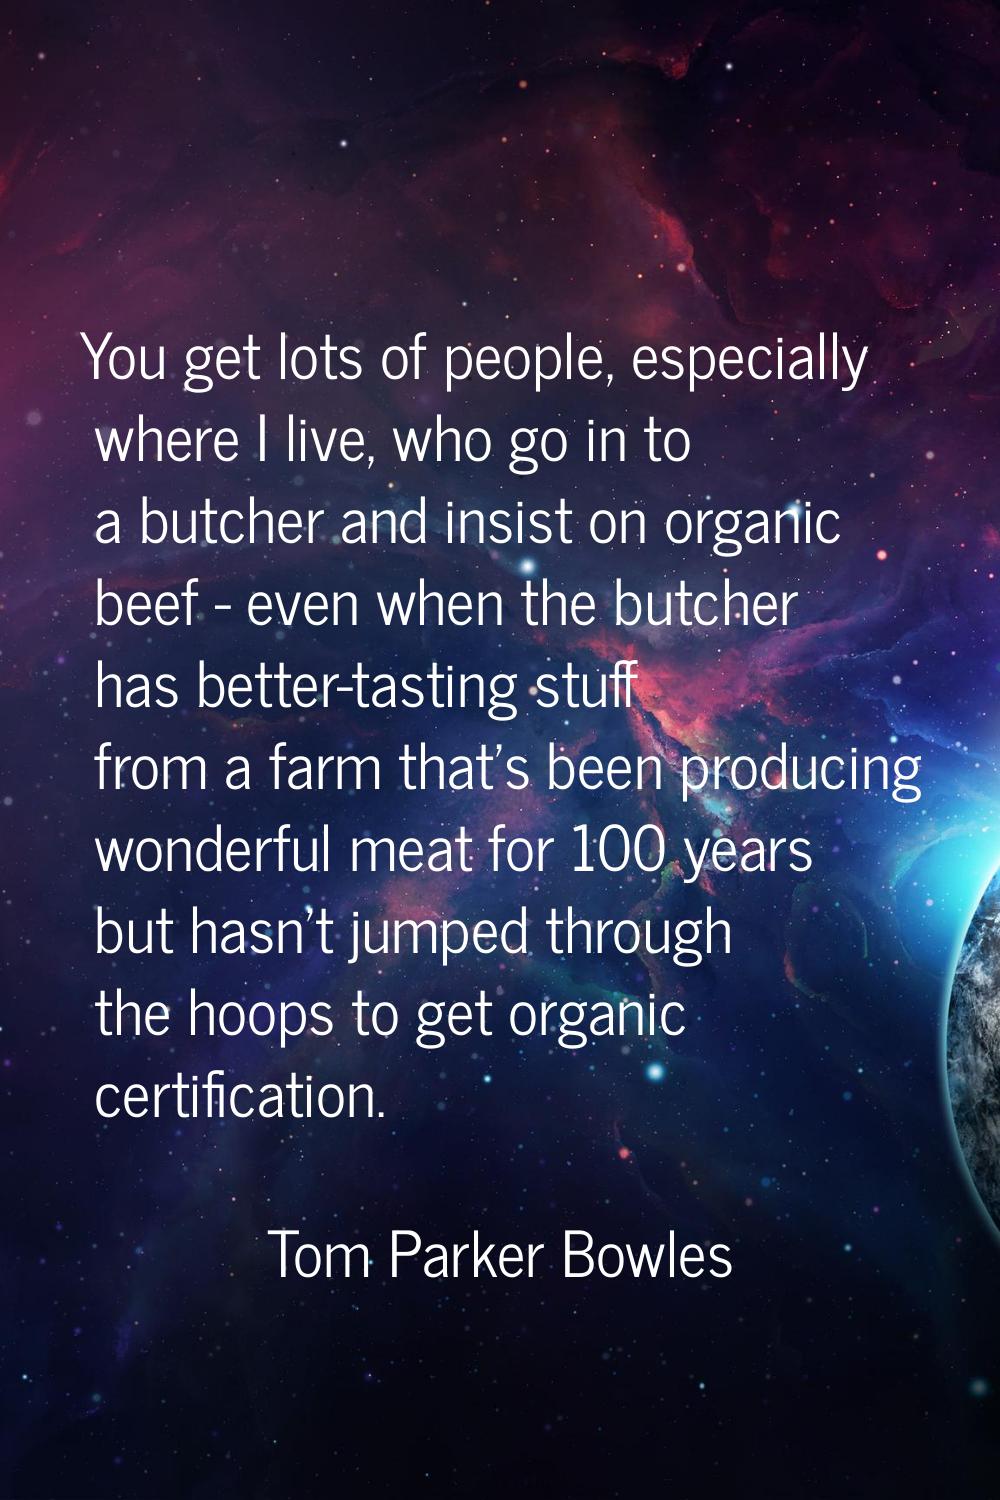 You get lots of people, especially where I live, who go in to a butcher and insist on organic beef 